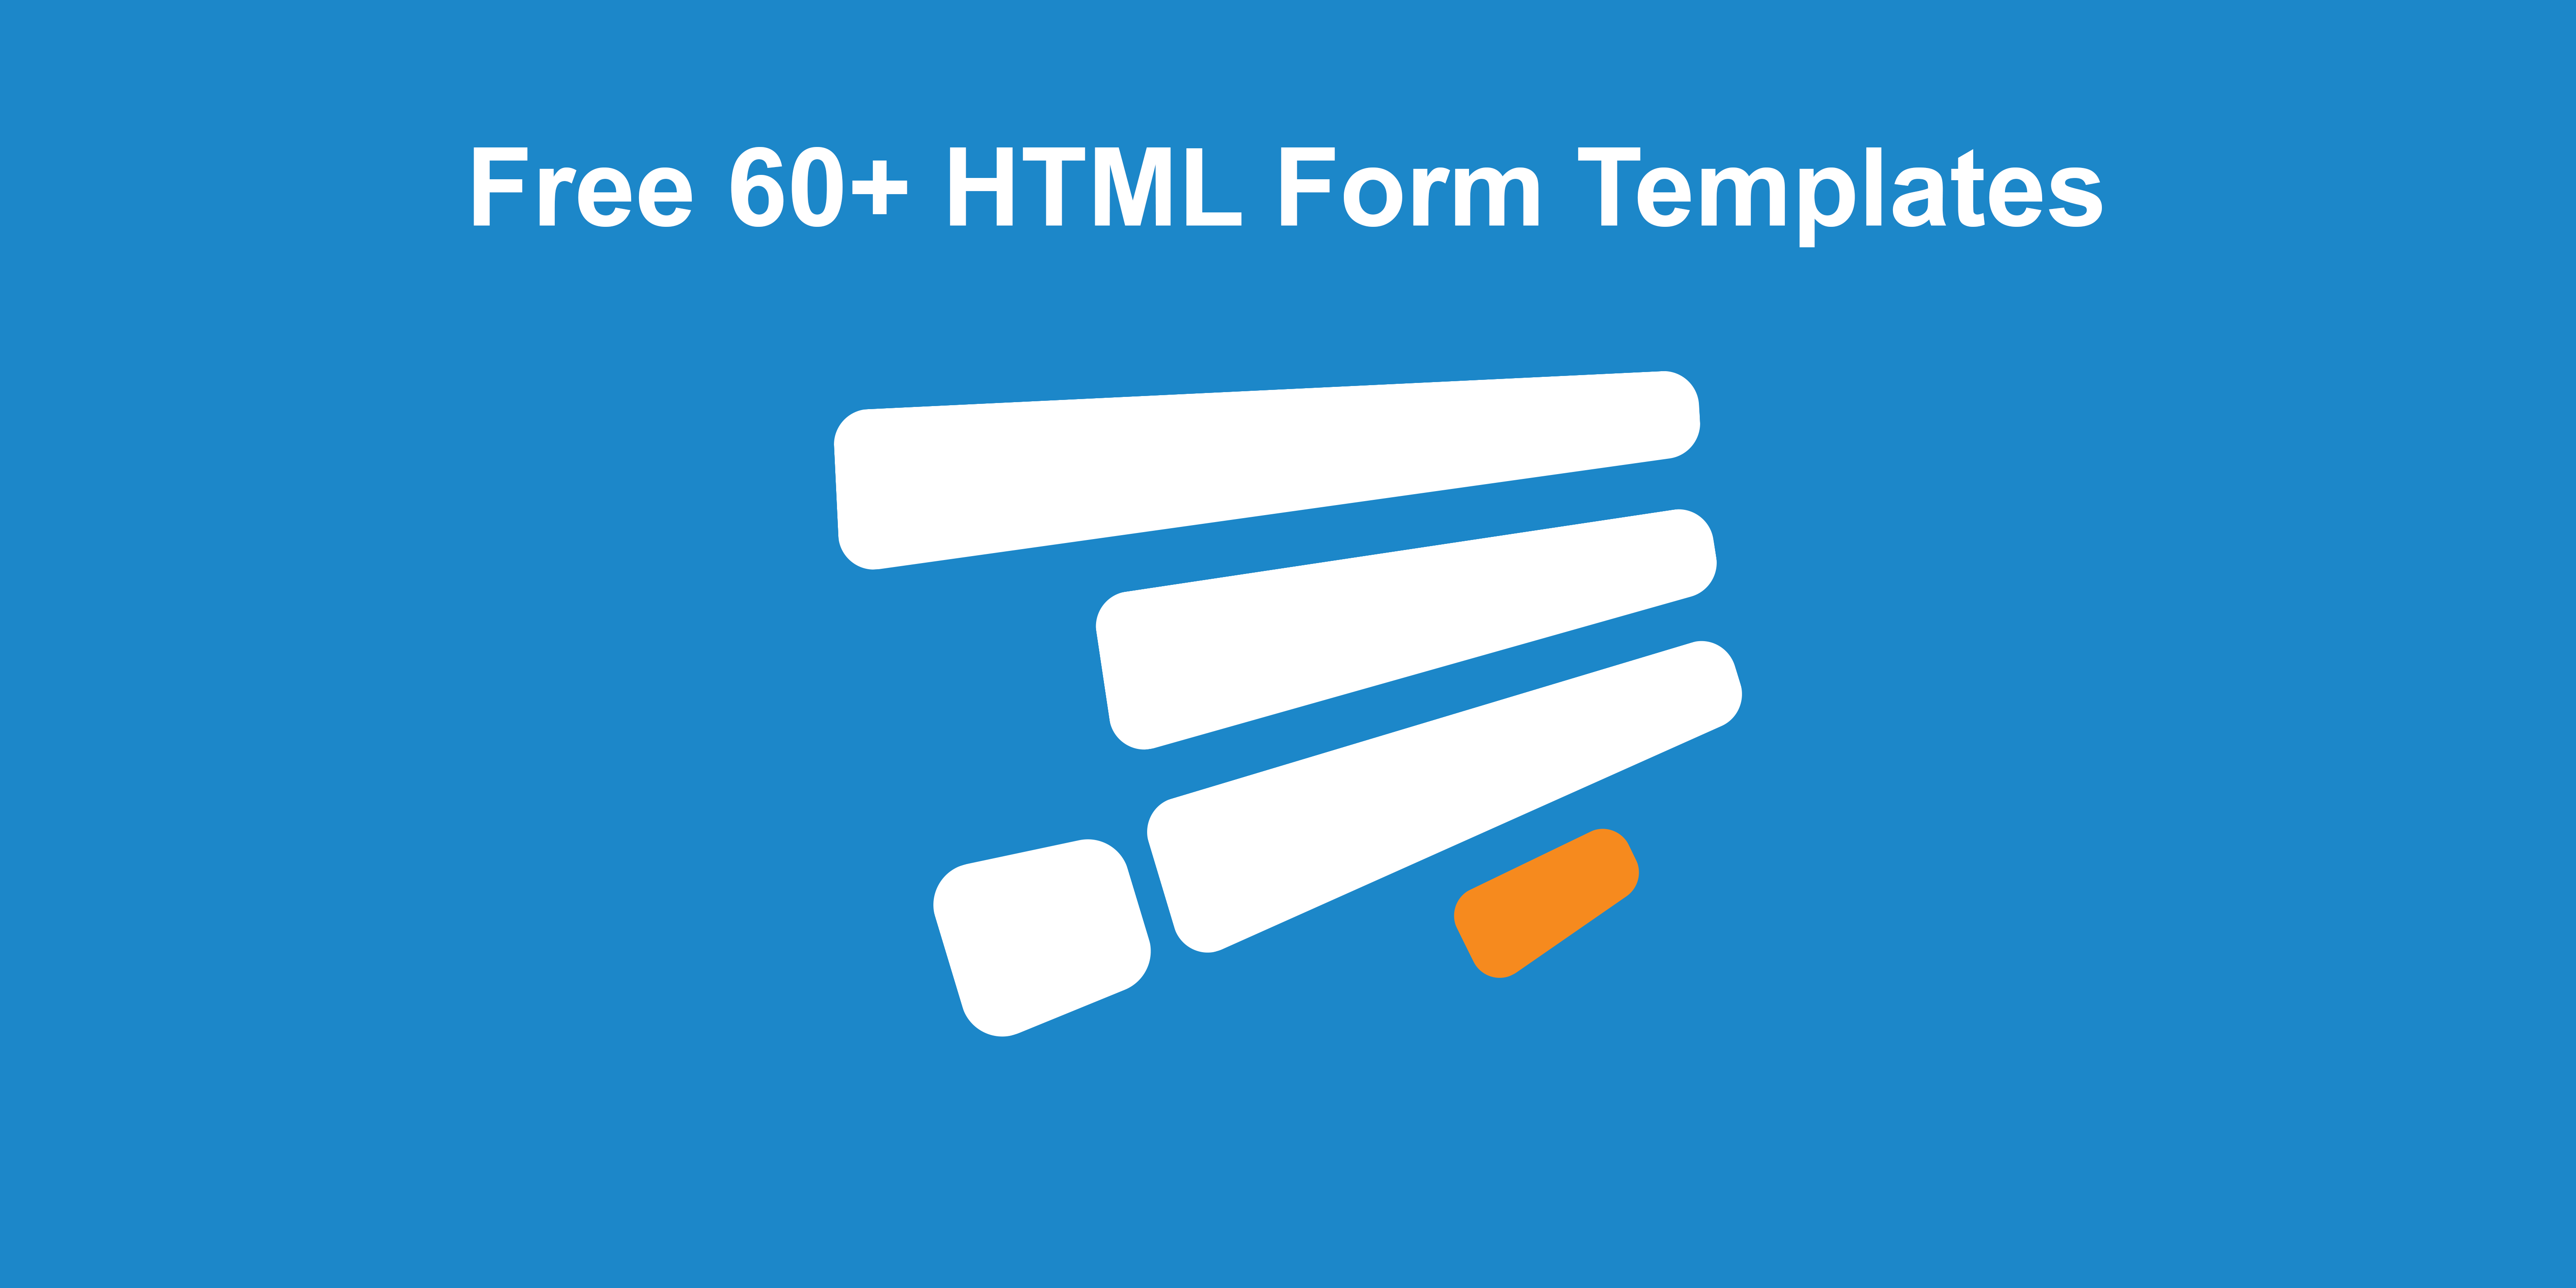 60+ HTML Form Templates Free to Copy and Use